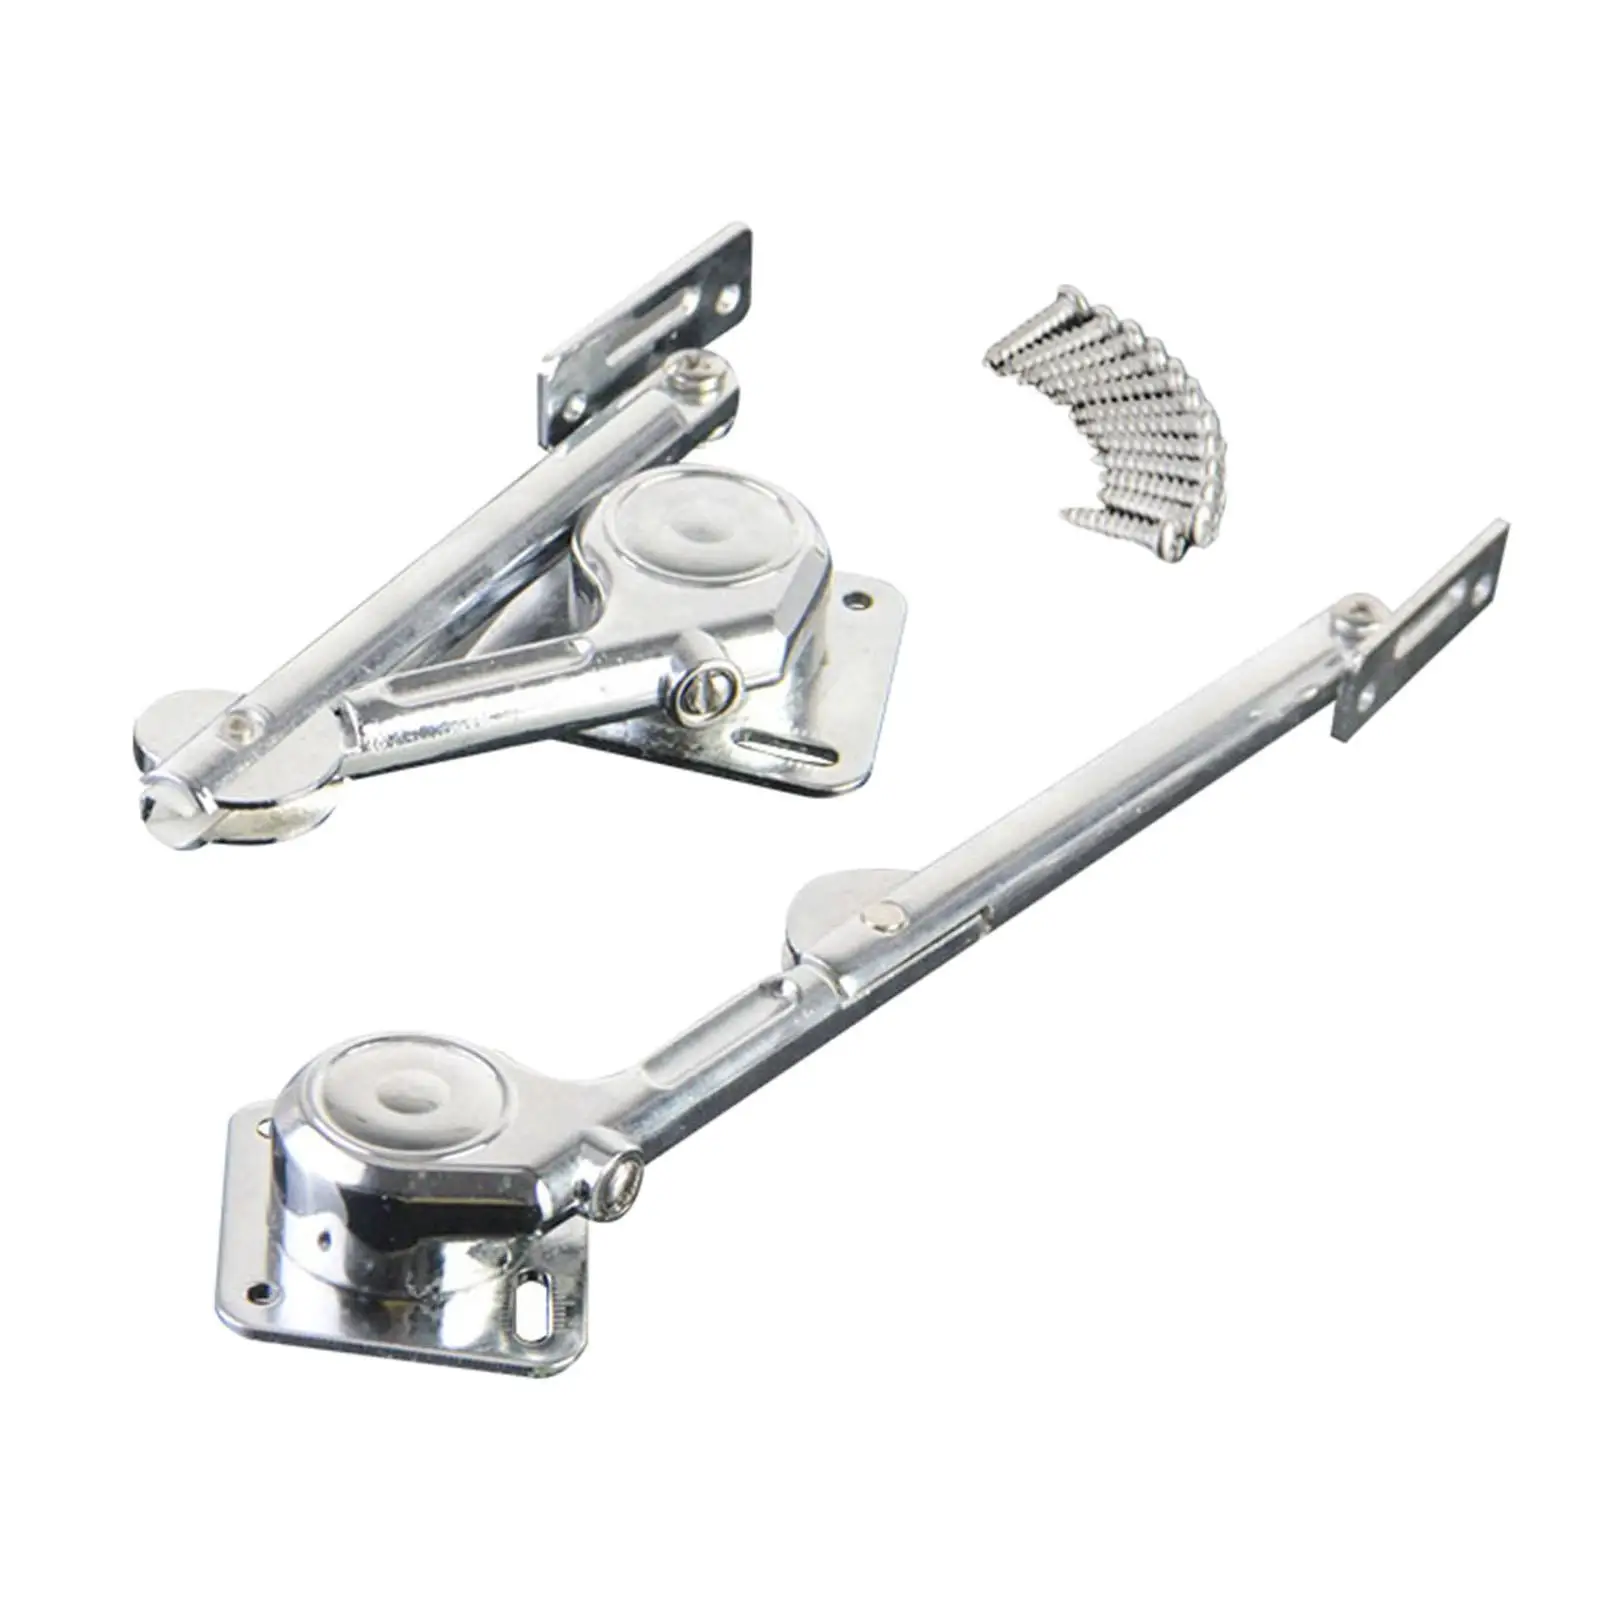 2Pcs Heavy Duty Hydraulic Hinges Support Adjustable Accessories Furniture Shock Hardware Lift up for Kitchen Cabinet